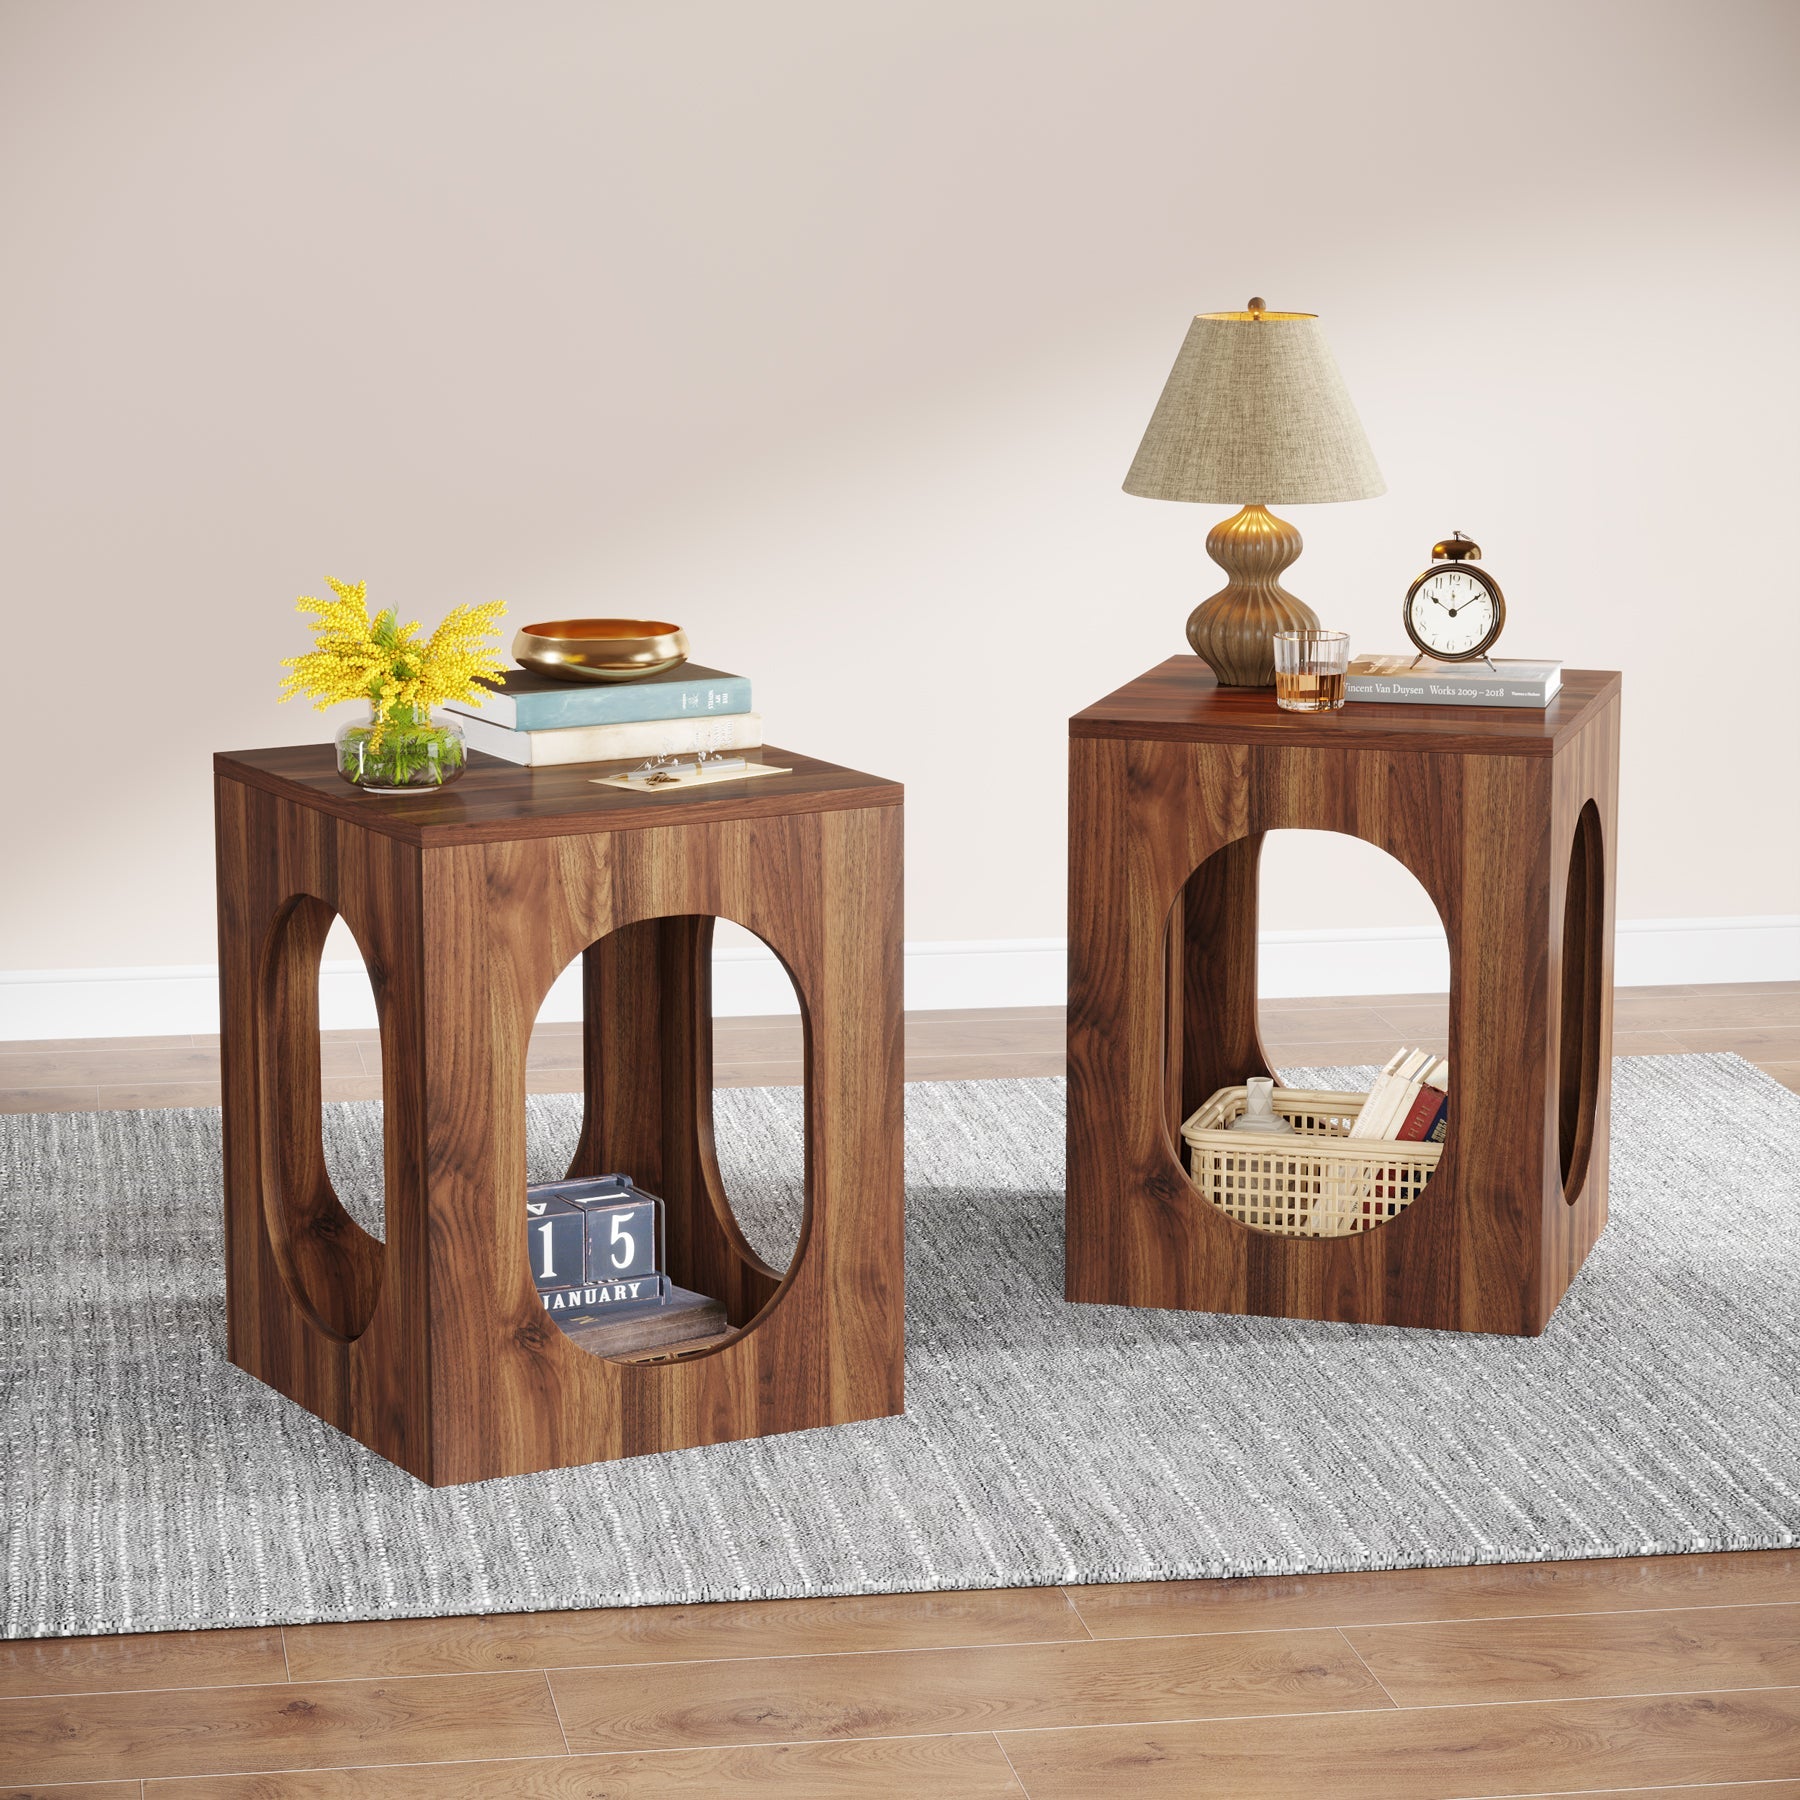 Wood End Table, Square Side Table with 2-tier Storage Shelves